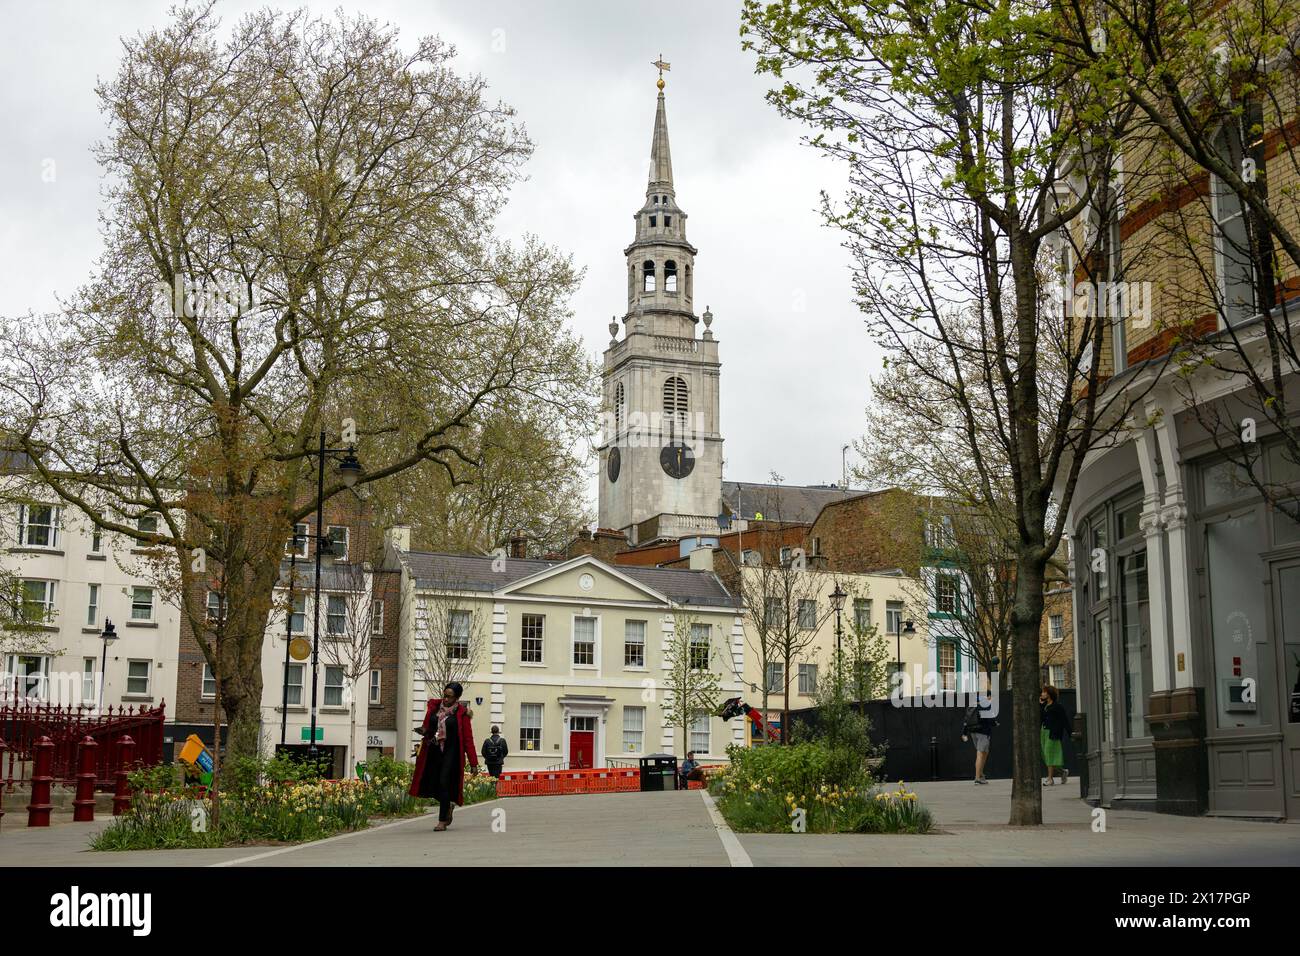 St James’s Church, Clerkenwell, with its historic Georgian architecture, stands amidst London's vibrant cityscape Stock Photo